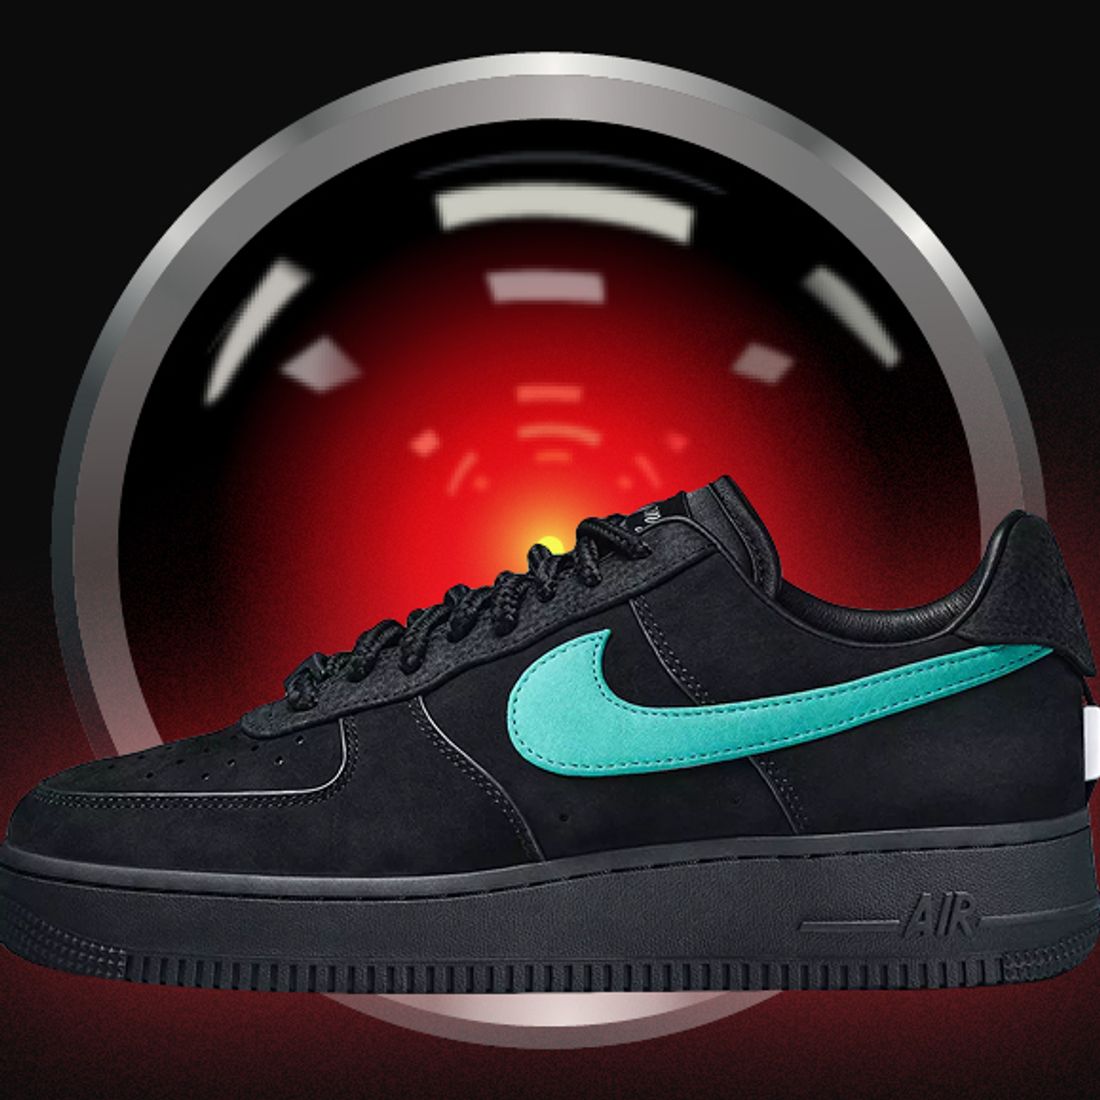 Tiffany & Co. Nike Air Force 1: Social media reactions, how to buy